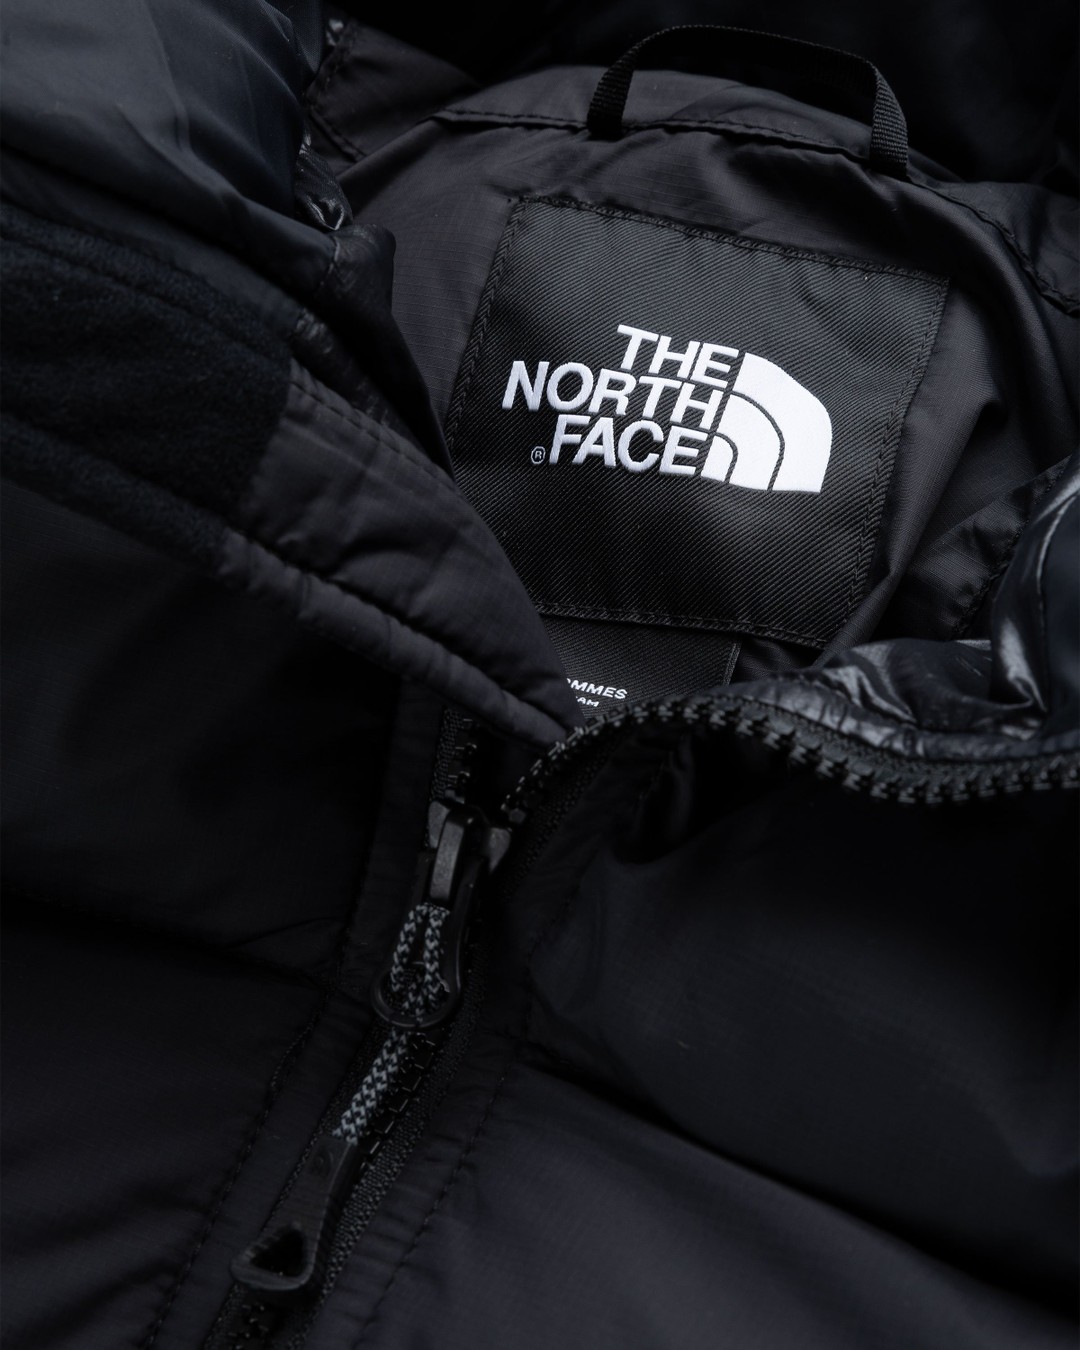 The North Face – Rusta 2.0 Puffer Jacket Black - Outerwear - Black - Image 6